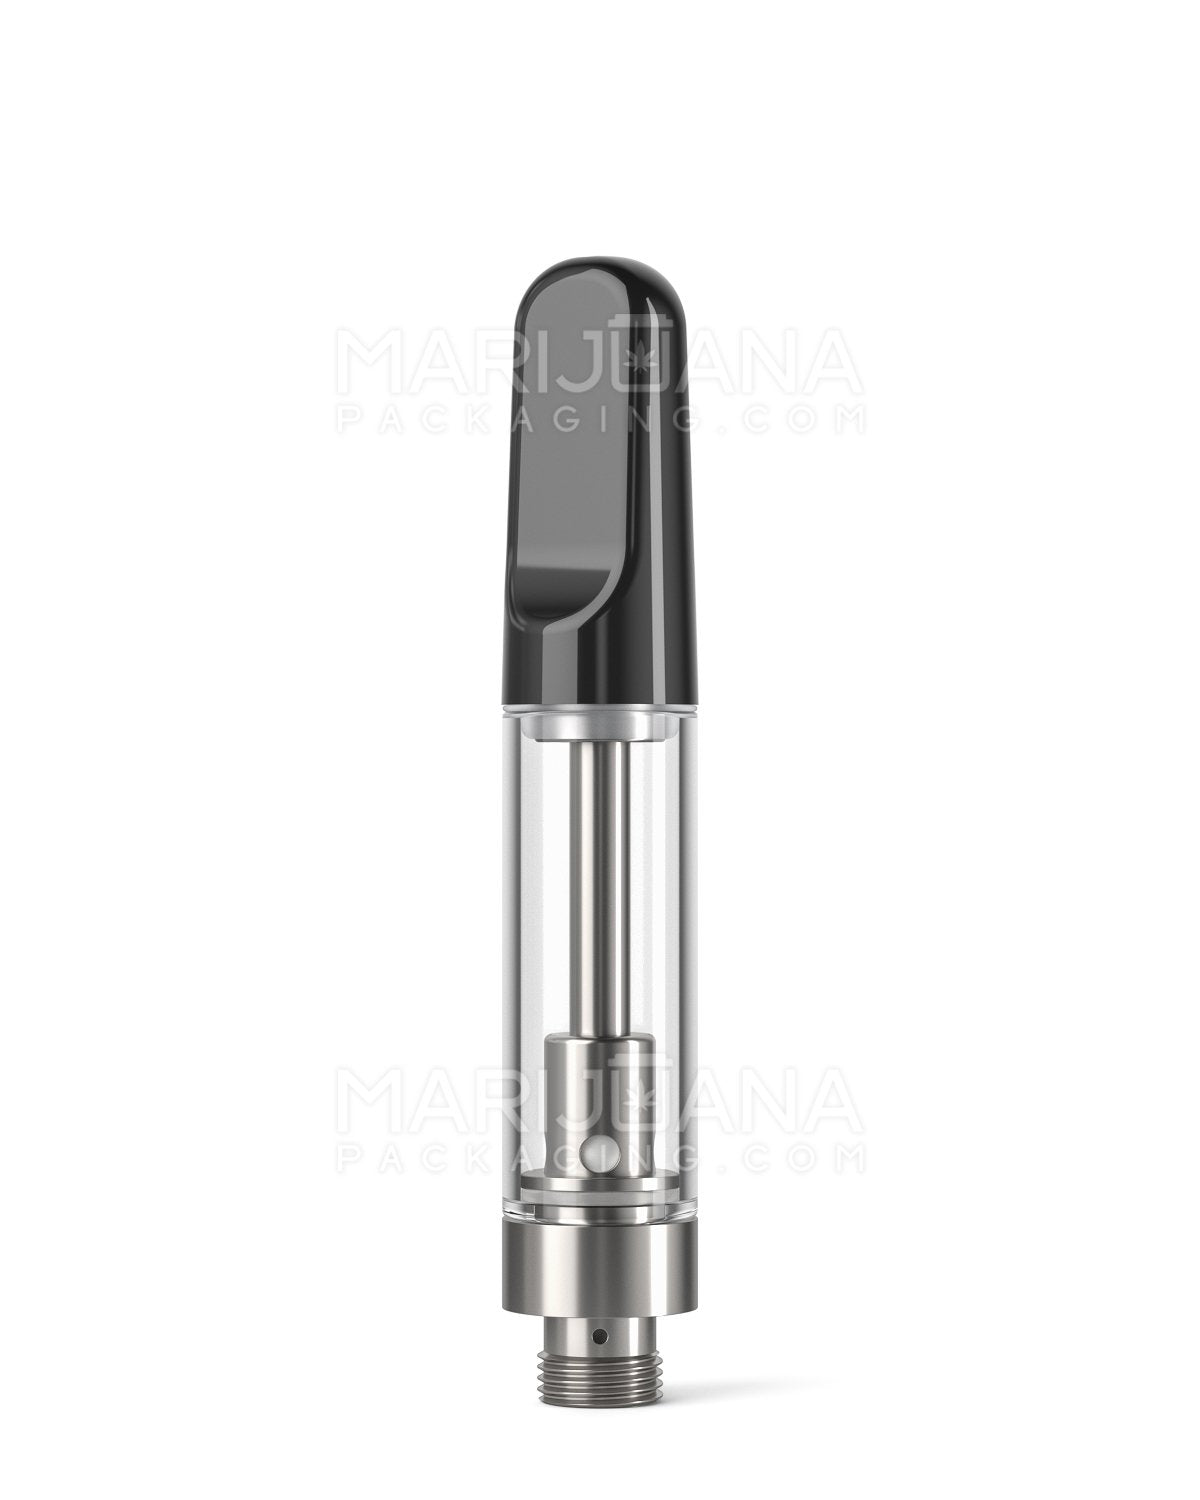 CCELL | Liquid6 Reactor Glass Cartridge with Black Ceramic Mouthpiece | 1mL - Screw On | Sample - 1